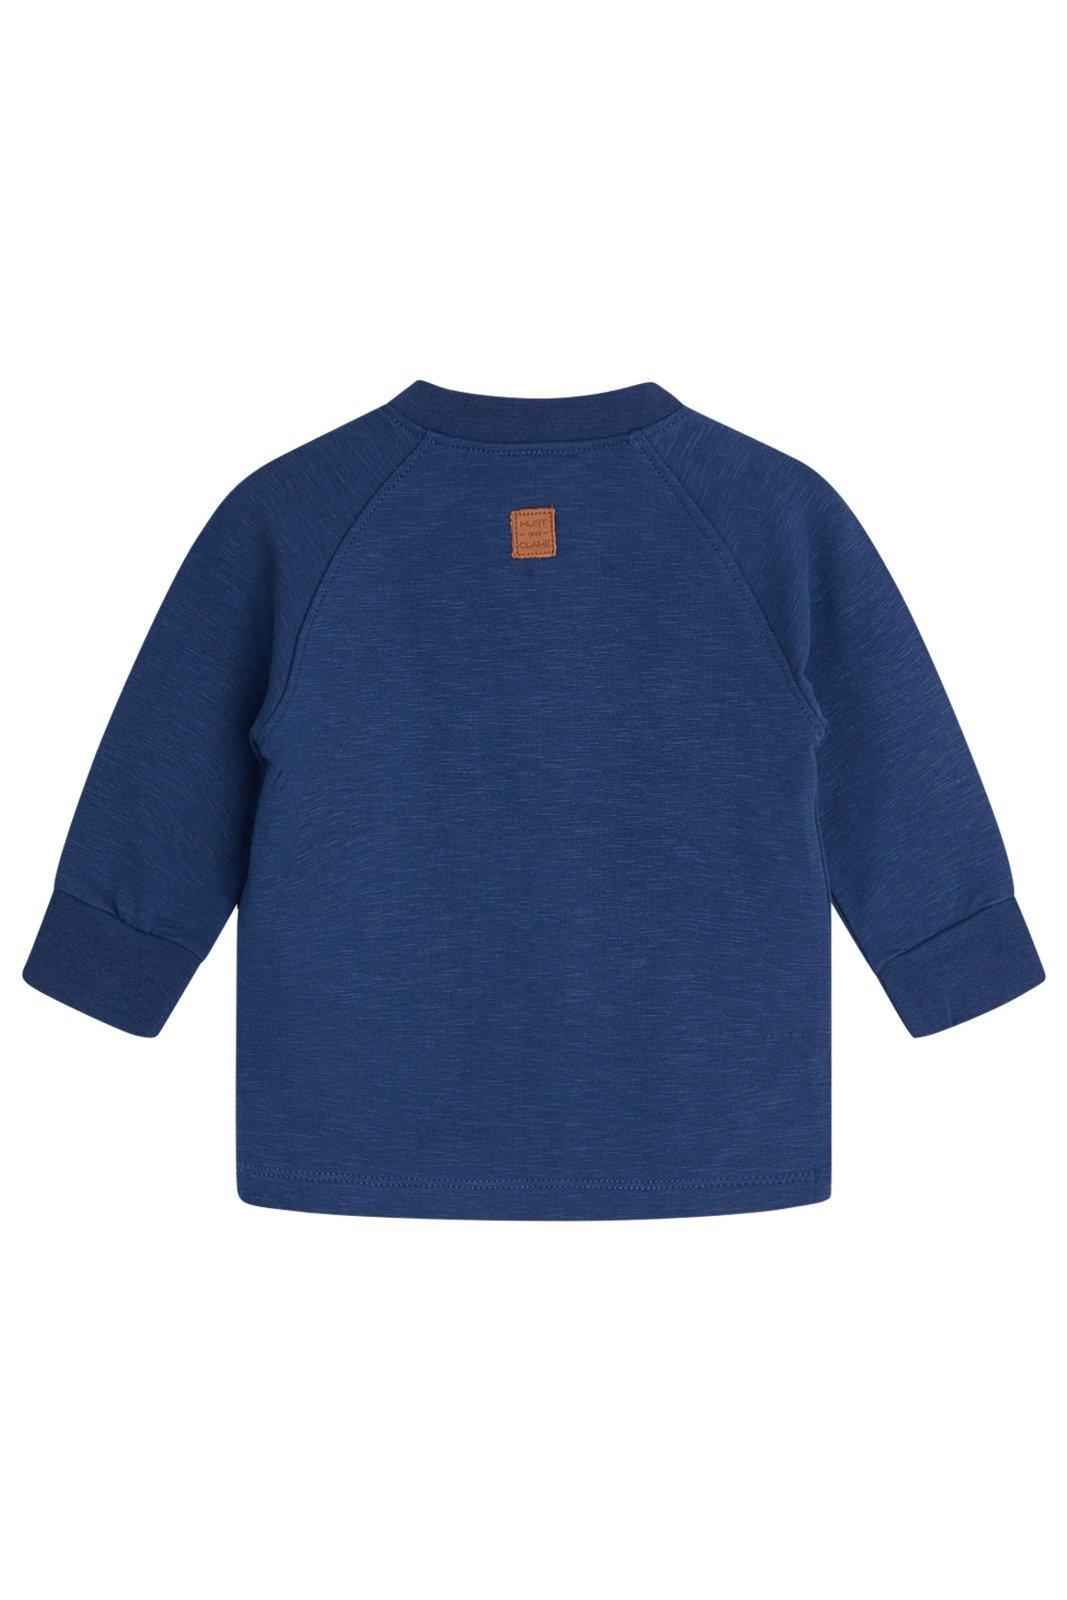 Hust and Claire  Baby Pullover Aslak Blue Moon 